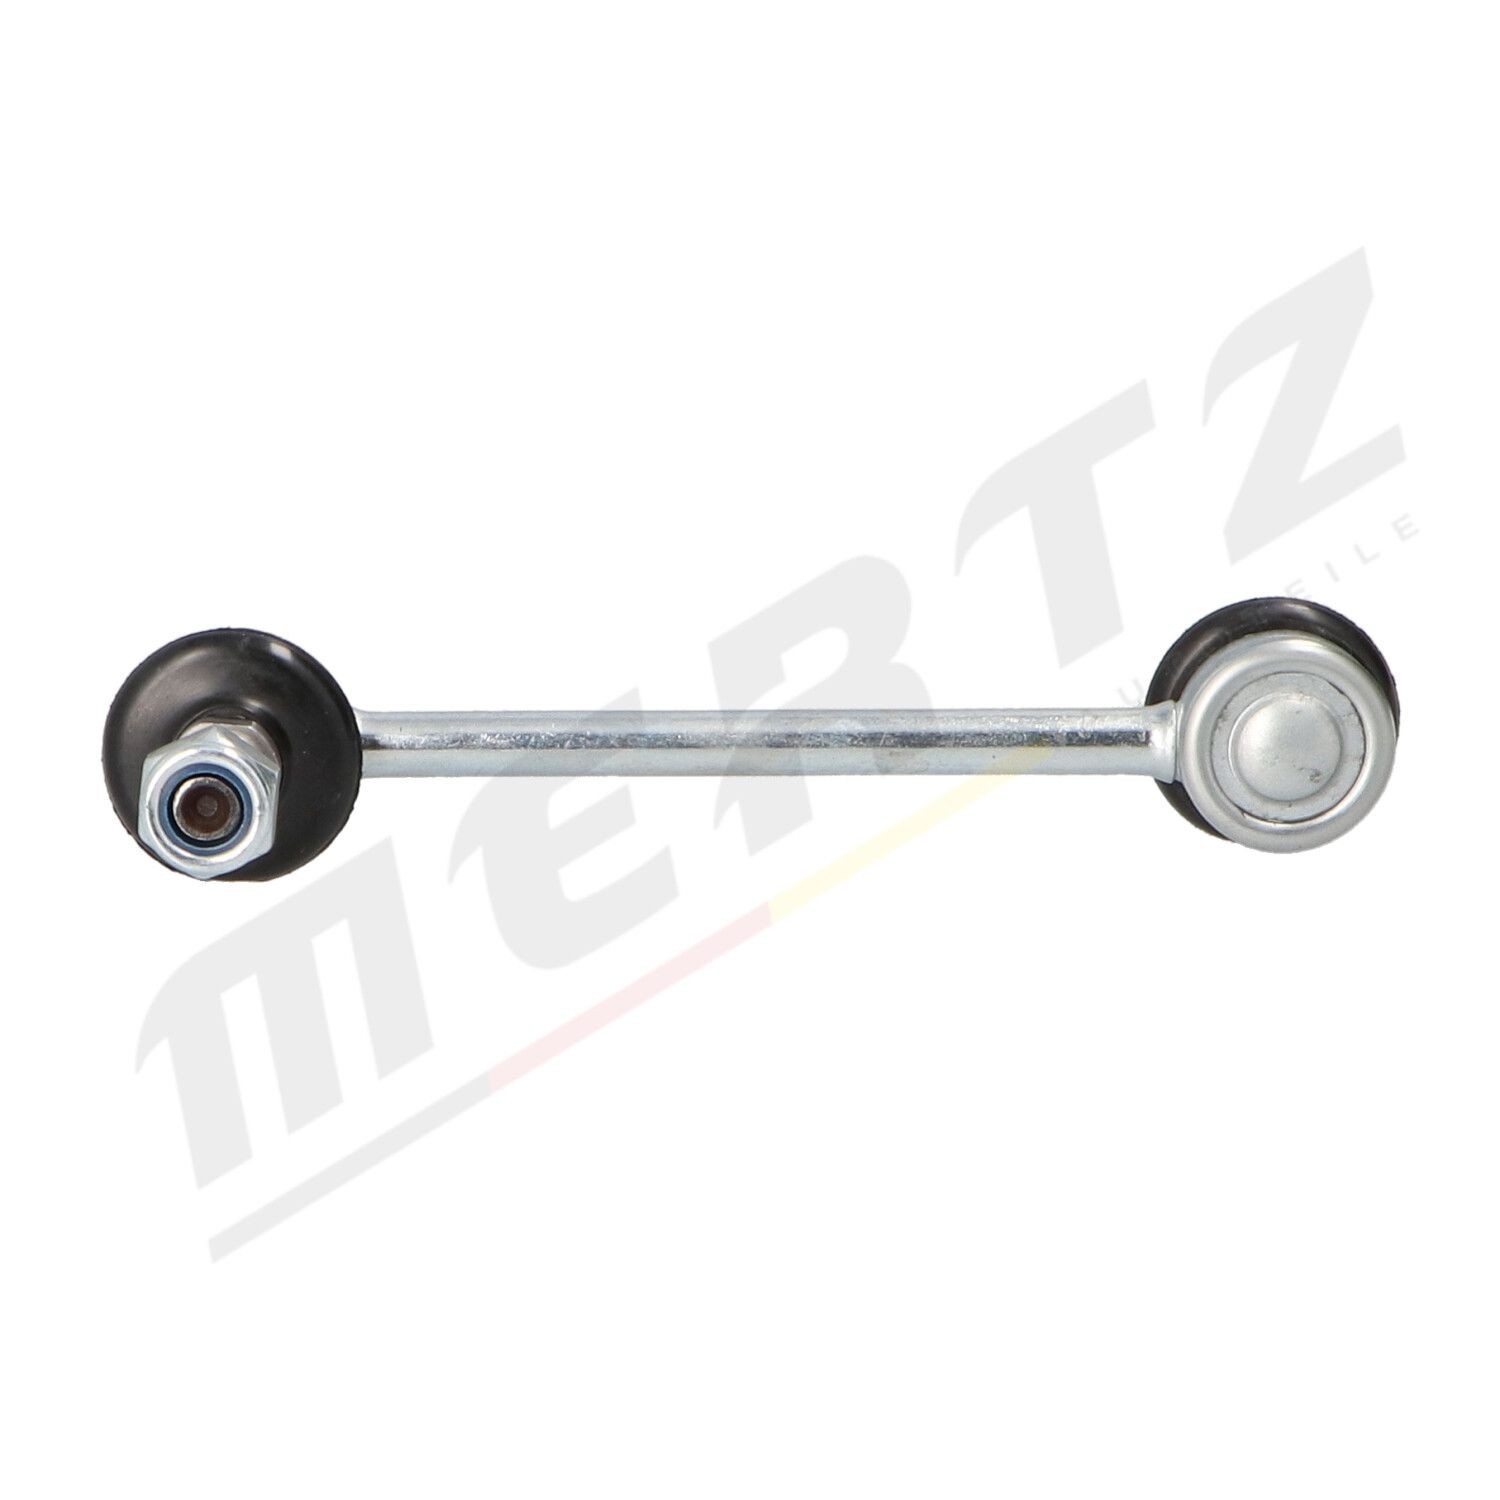 M-S1763 Anti-roll bar linkage M-S1763 MERTZ Front Axle Left, Front Axle Right, 150mm, M12x1,25 , with nut, Steel